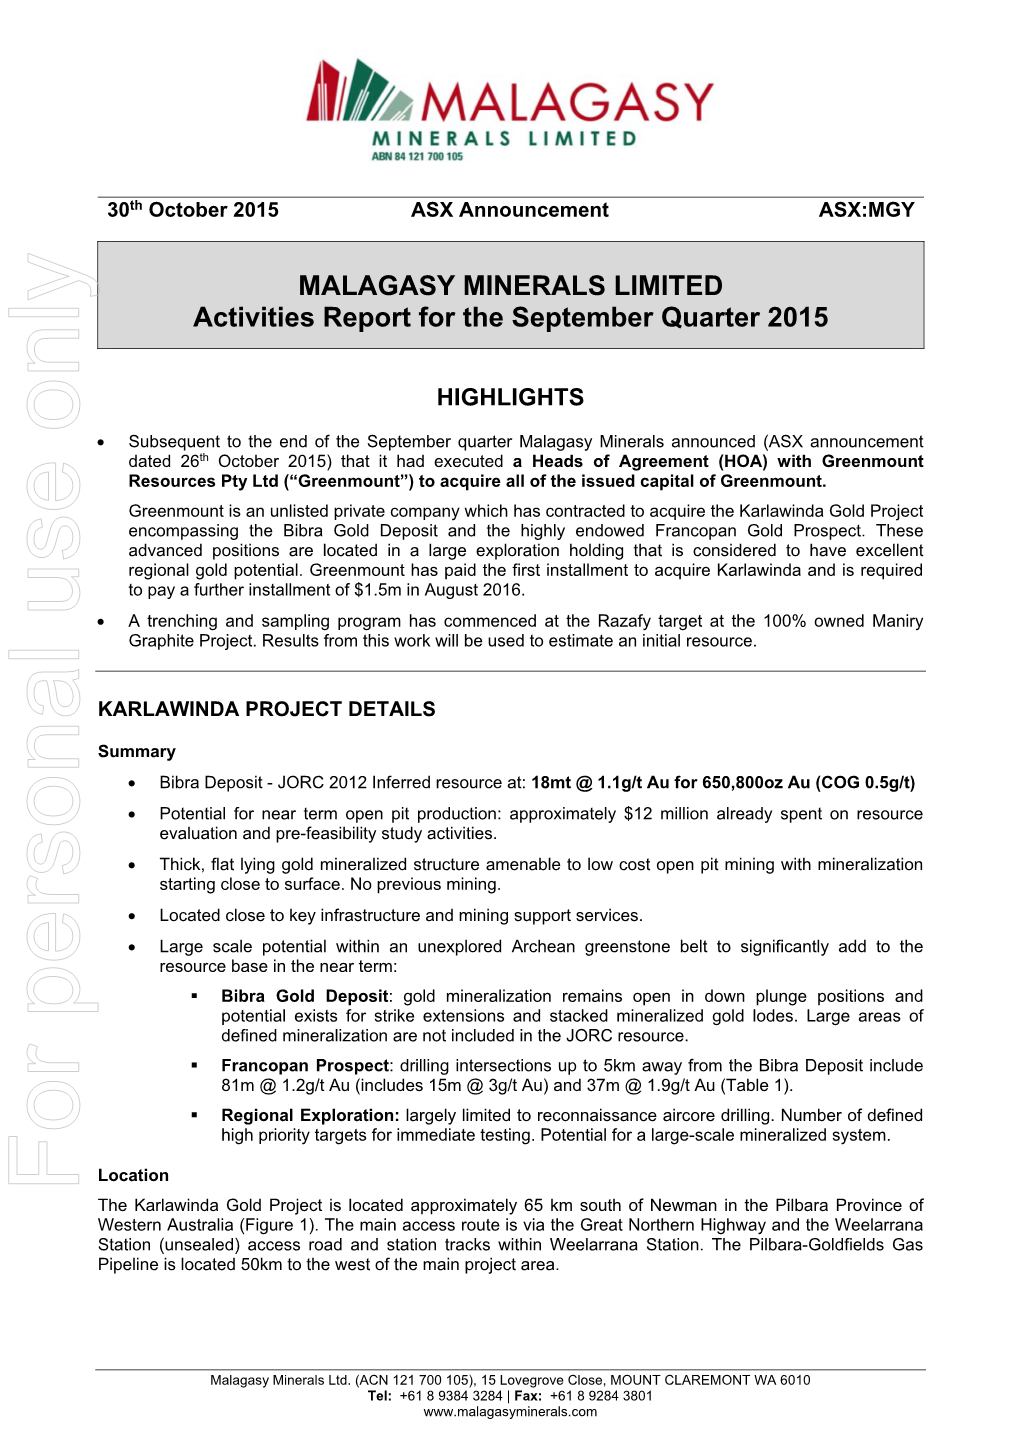 MALAGASY MINERALS LIMITED Activities Report for the September Quarter 2015